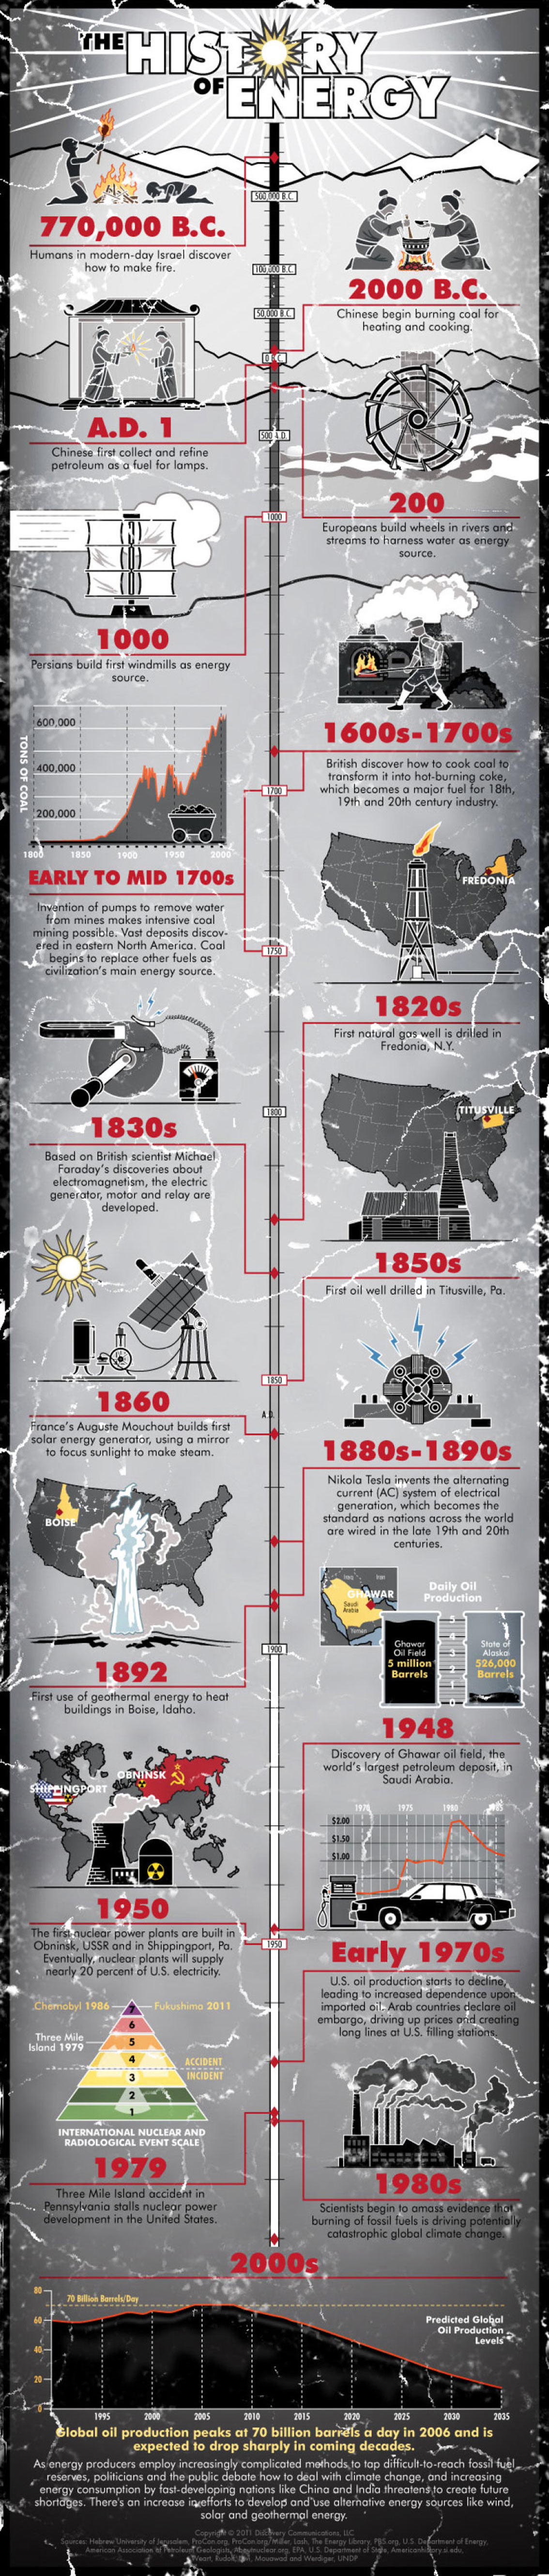 History of the Development of the Energy Source Infographic